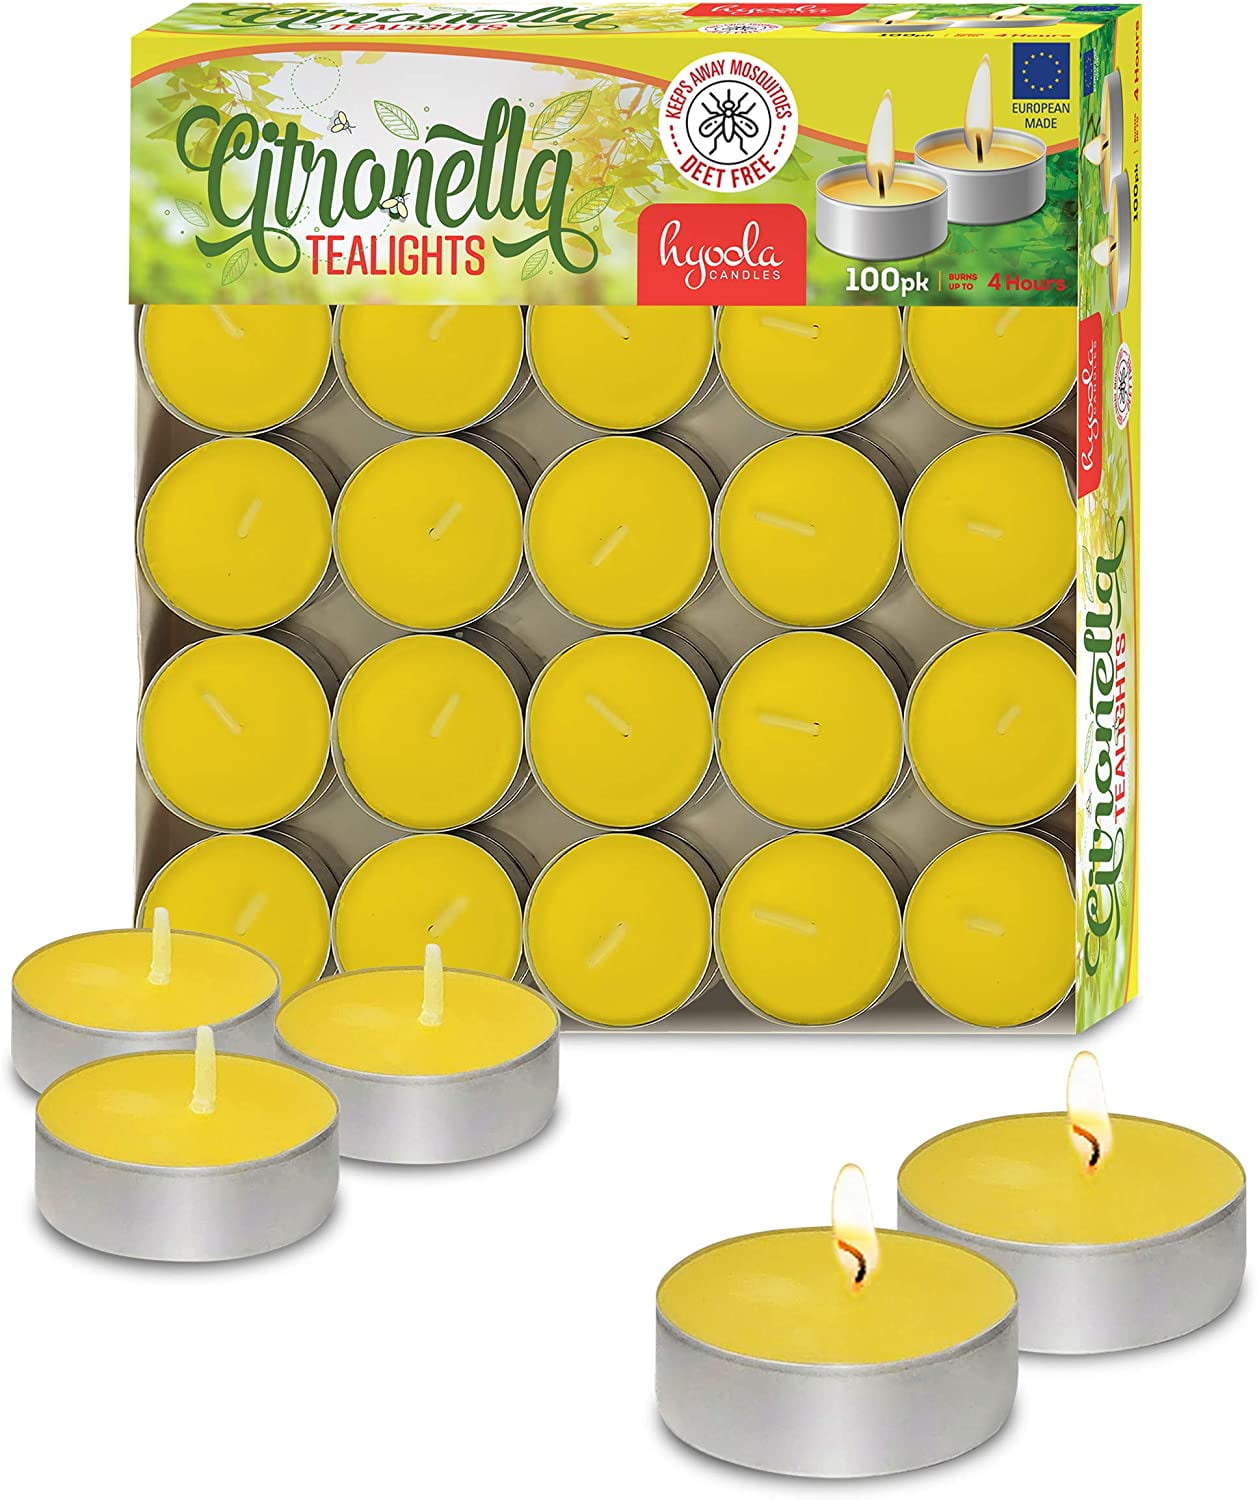 18 TOTAL CITRONELLA TEALIGHT Candles 6-PACKS Lot of 3 